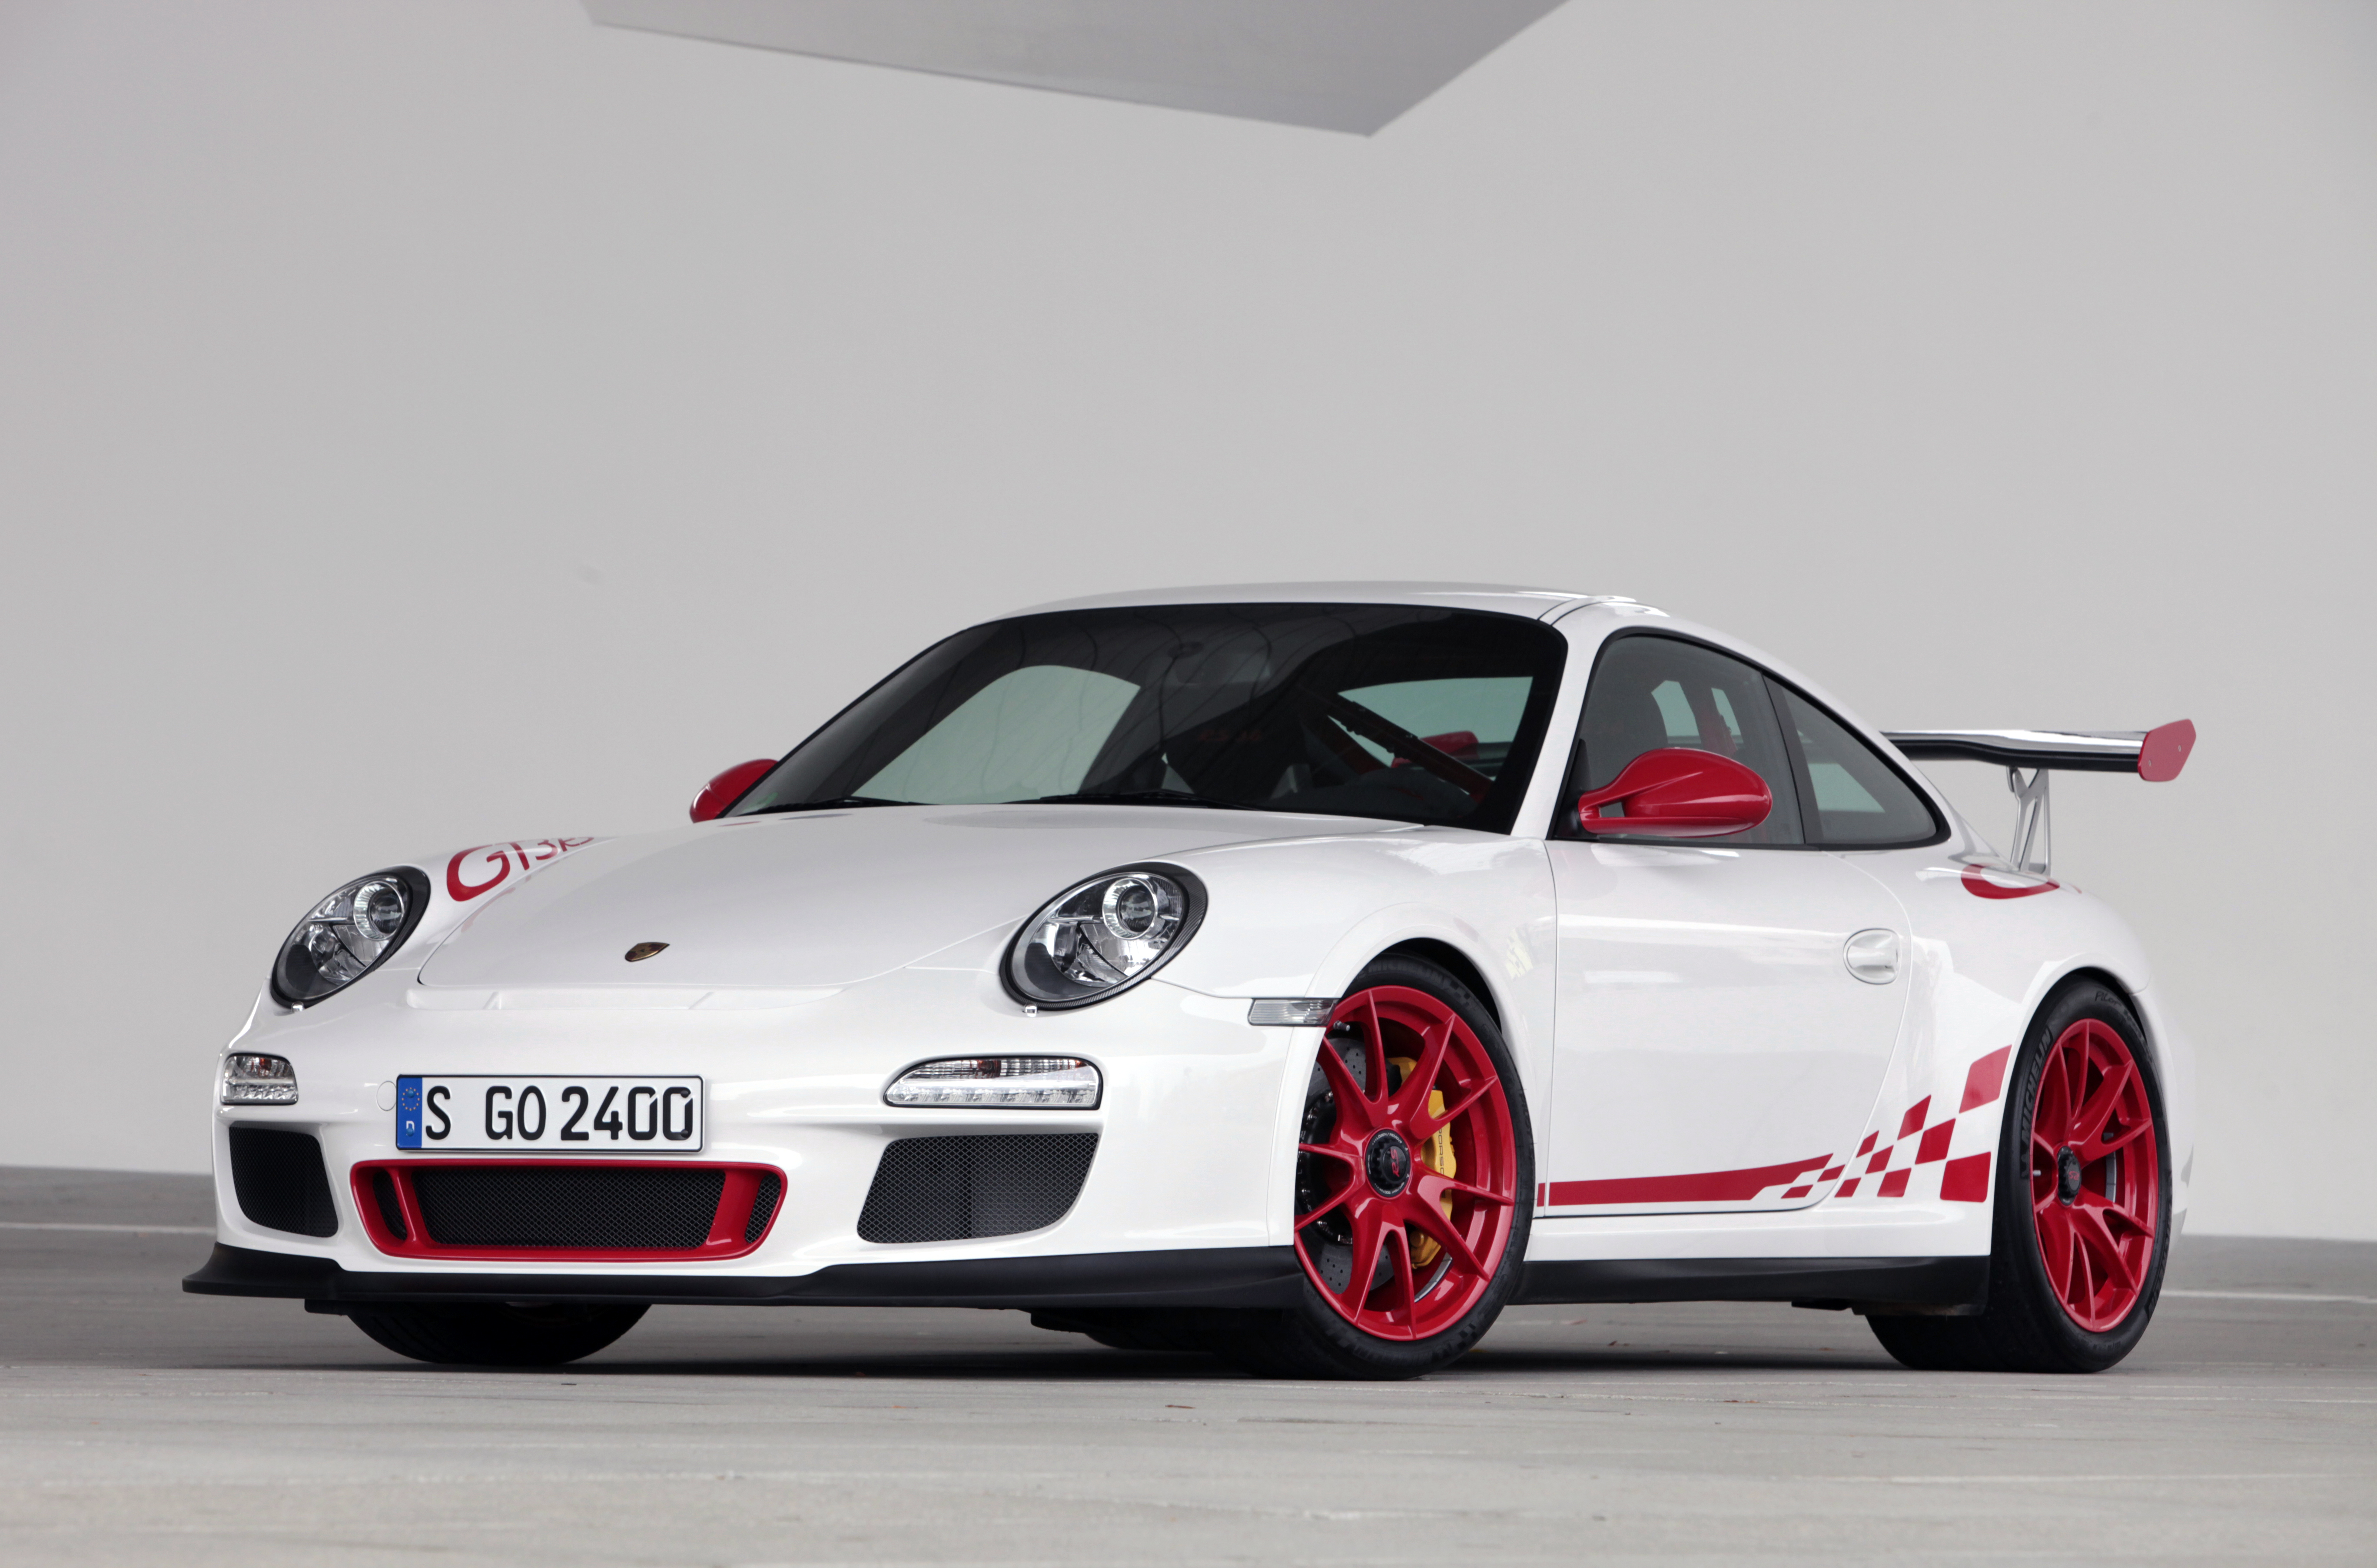 The GT3 is one of the lightest, hardest 911s you can get